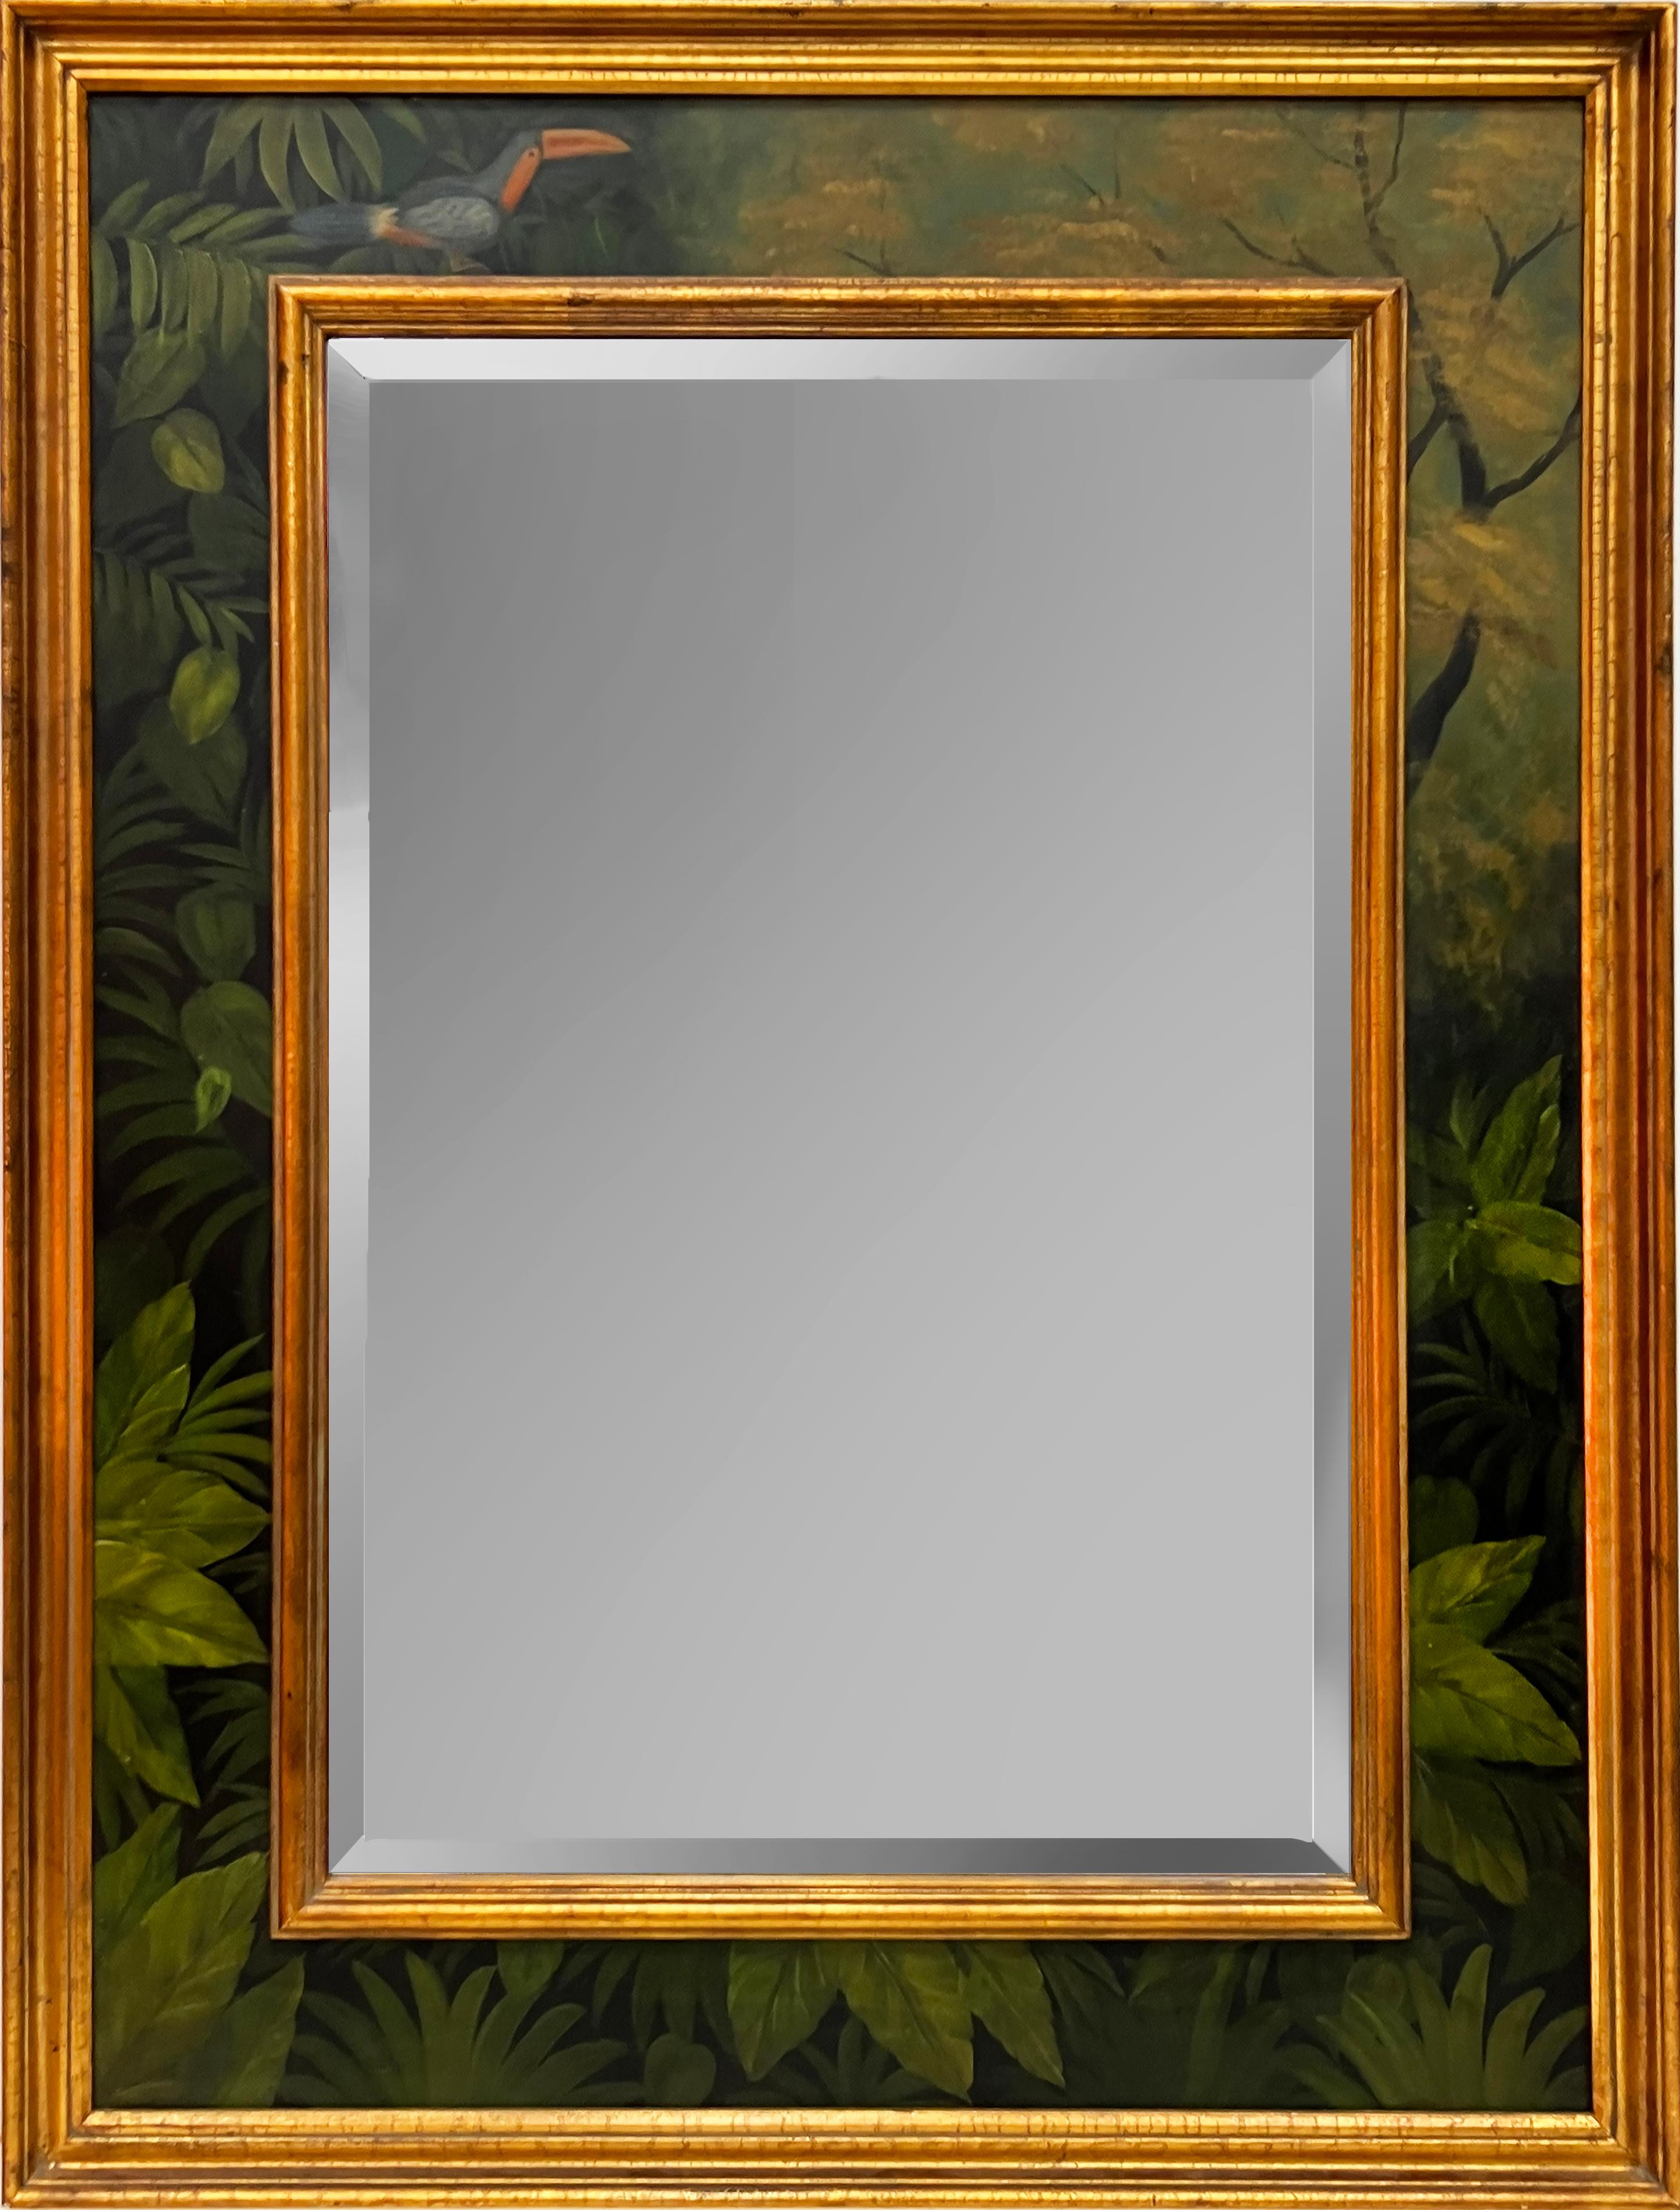 Vintage Palm Beach Regency Hand-Painted Beveled Mirror, Toucan with Foliage 4